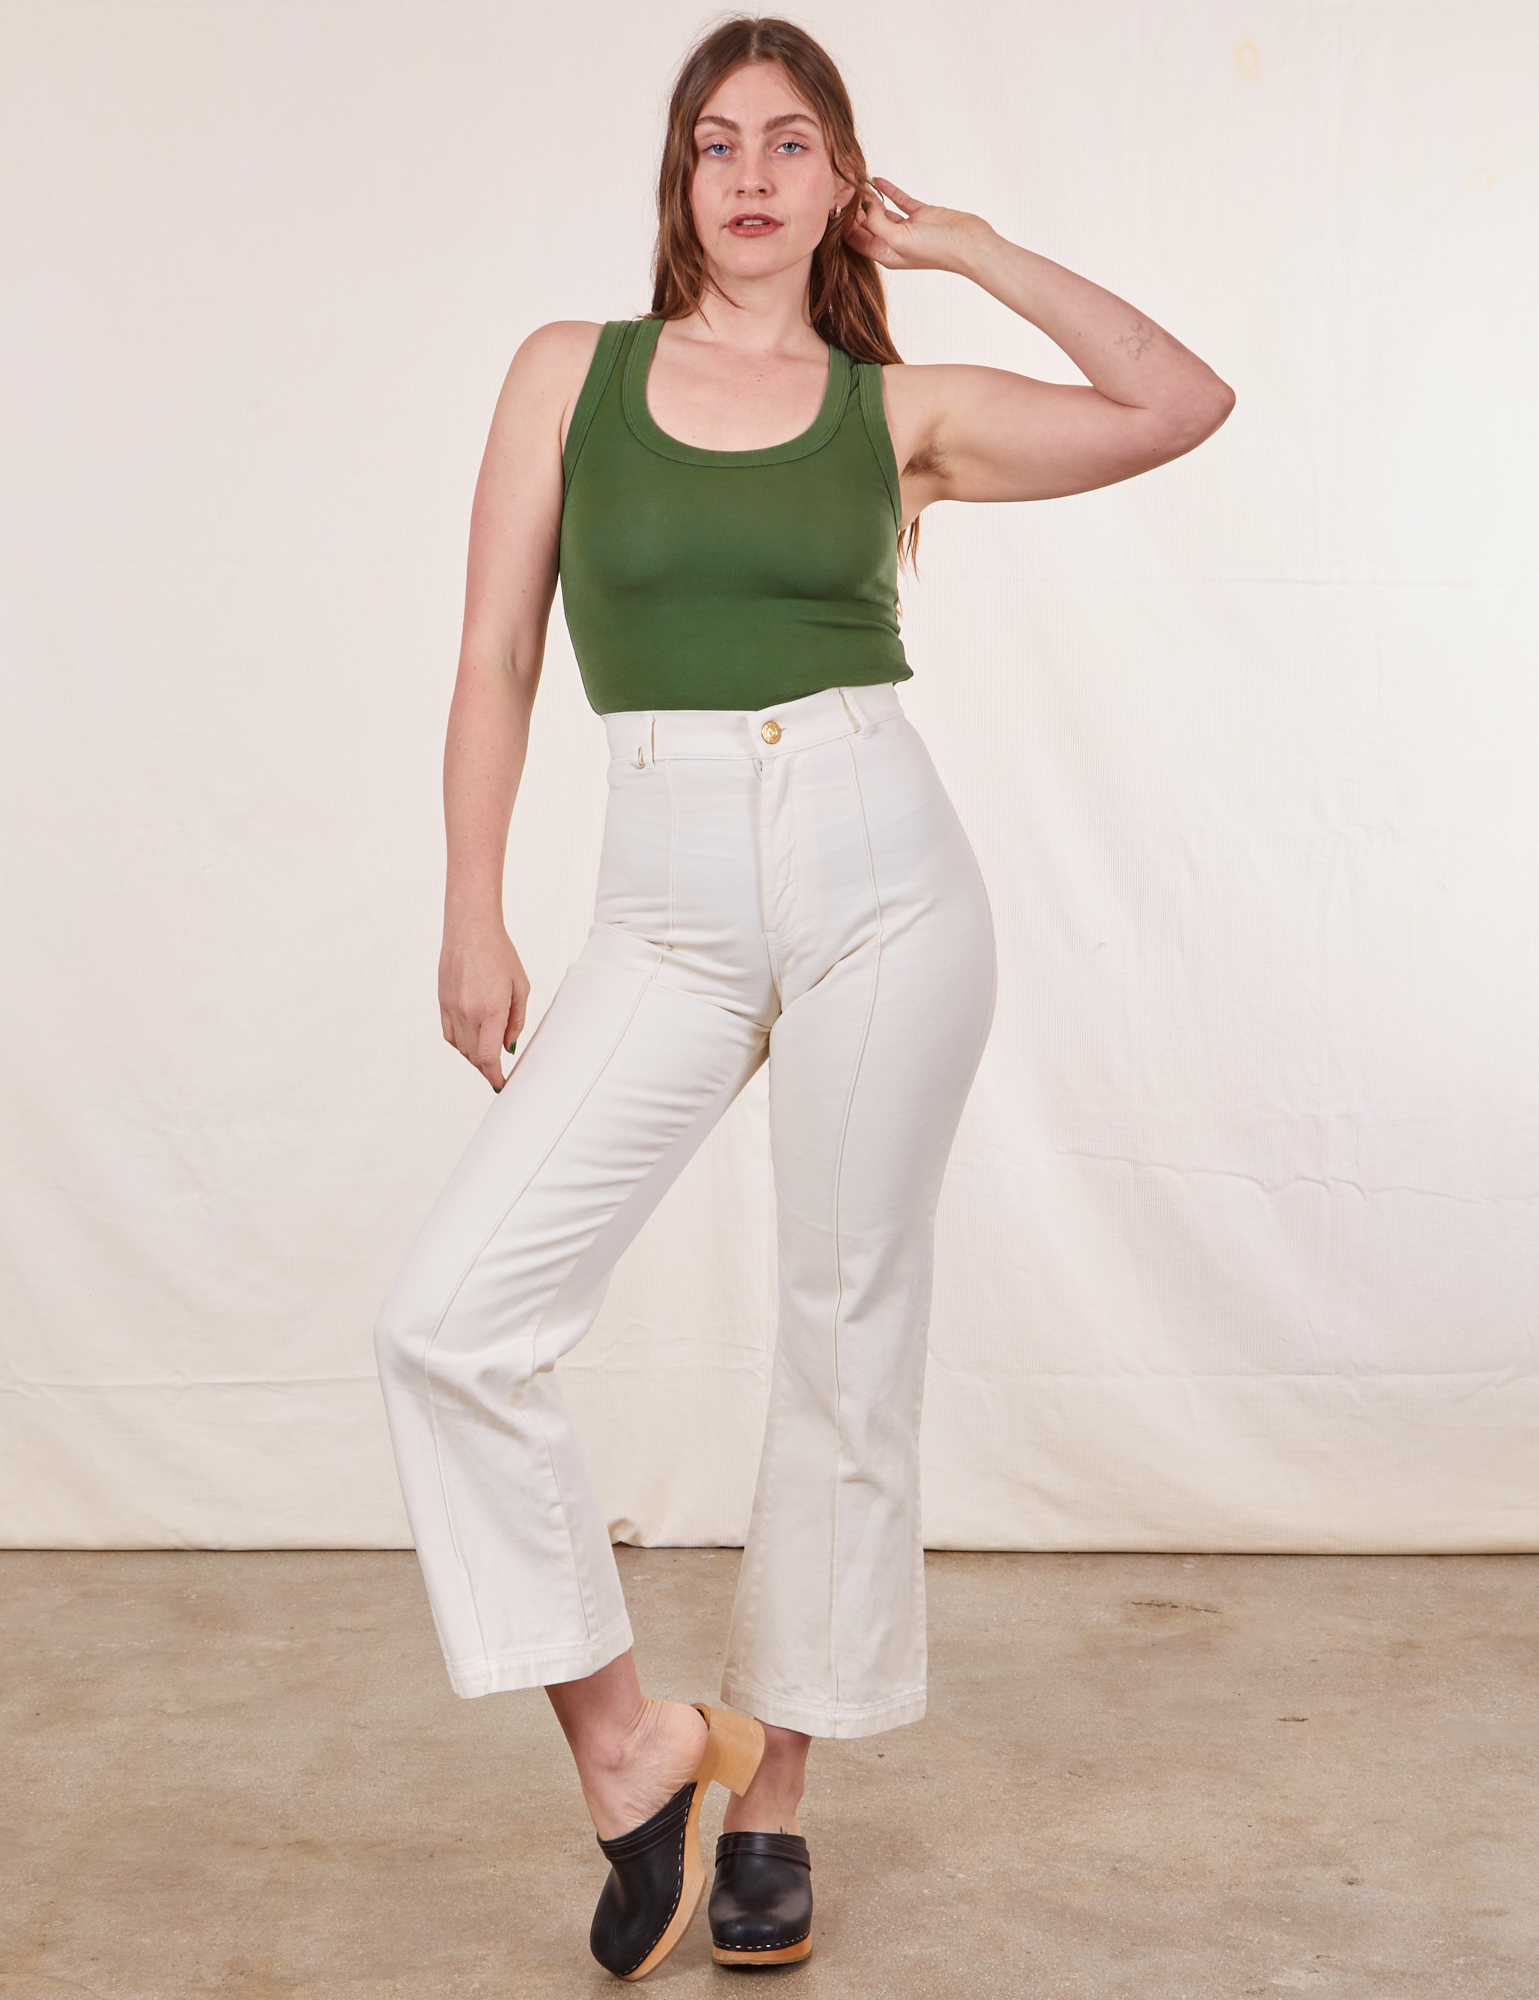 Allison is wearing XXS Tank Top in Dark Emerald Green paired with vintage tee off-white Western Pants